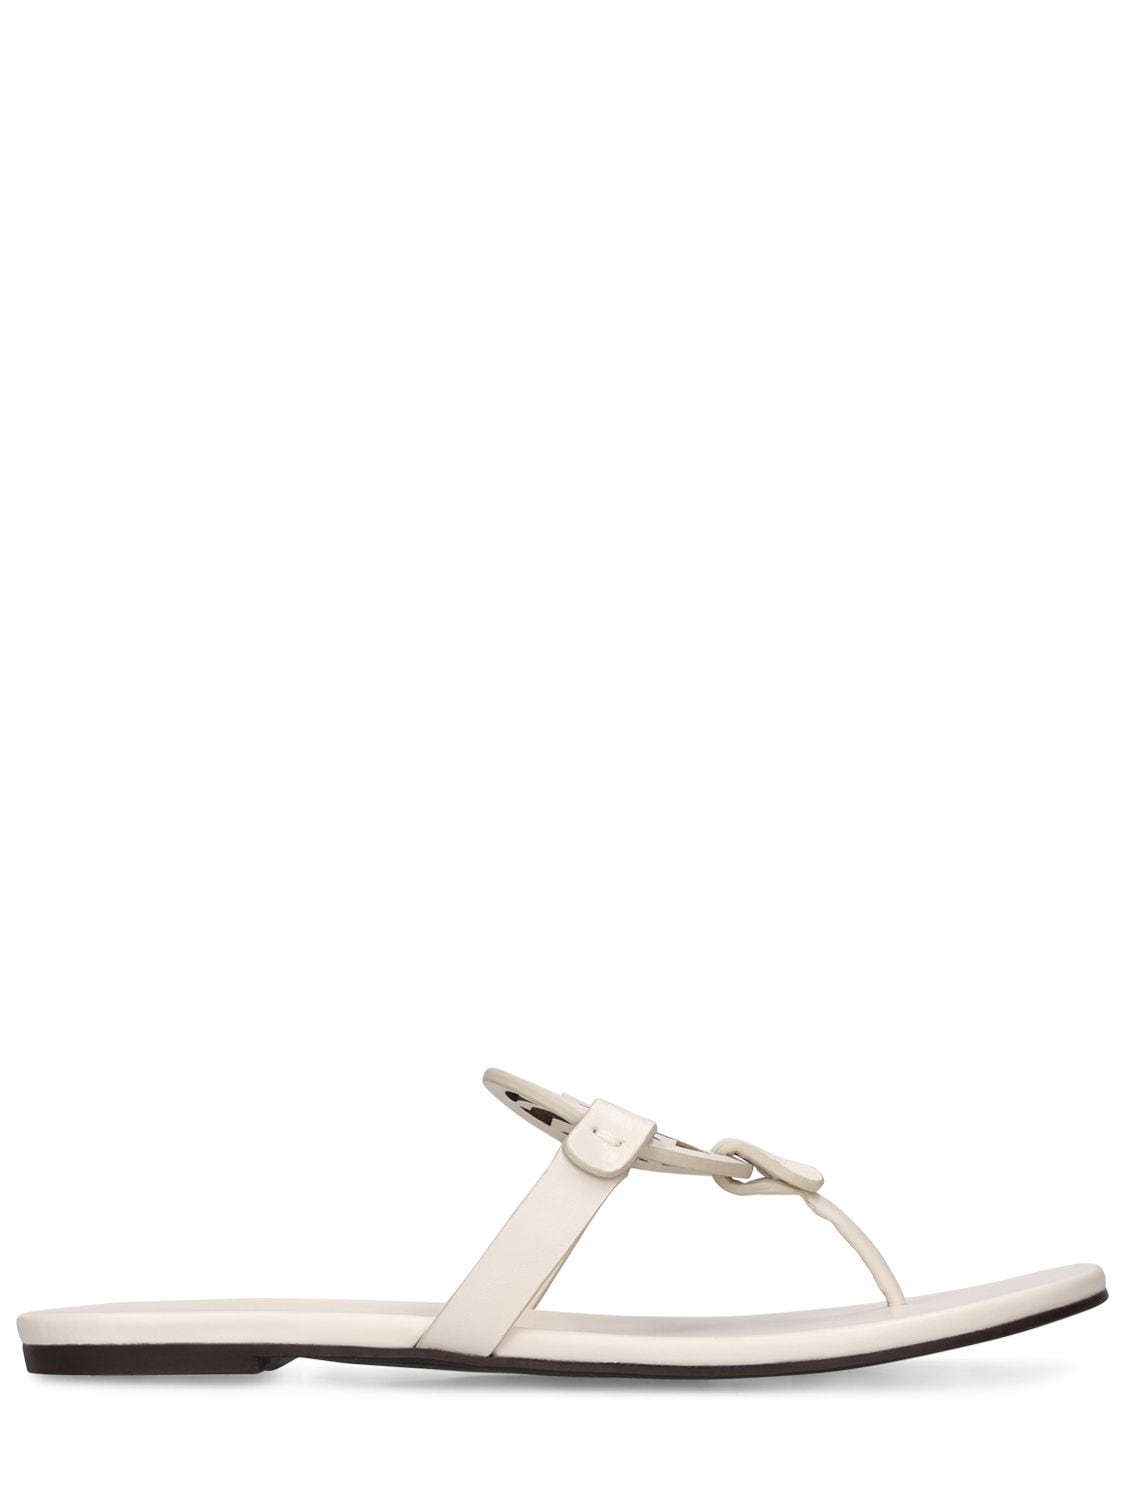 TORY BURCH 10MM MILLER LEATHER SANDALS